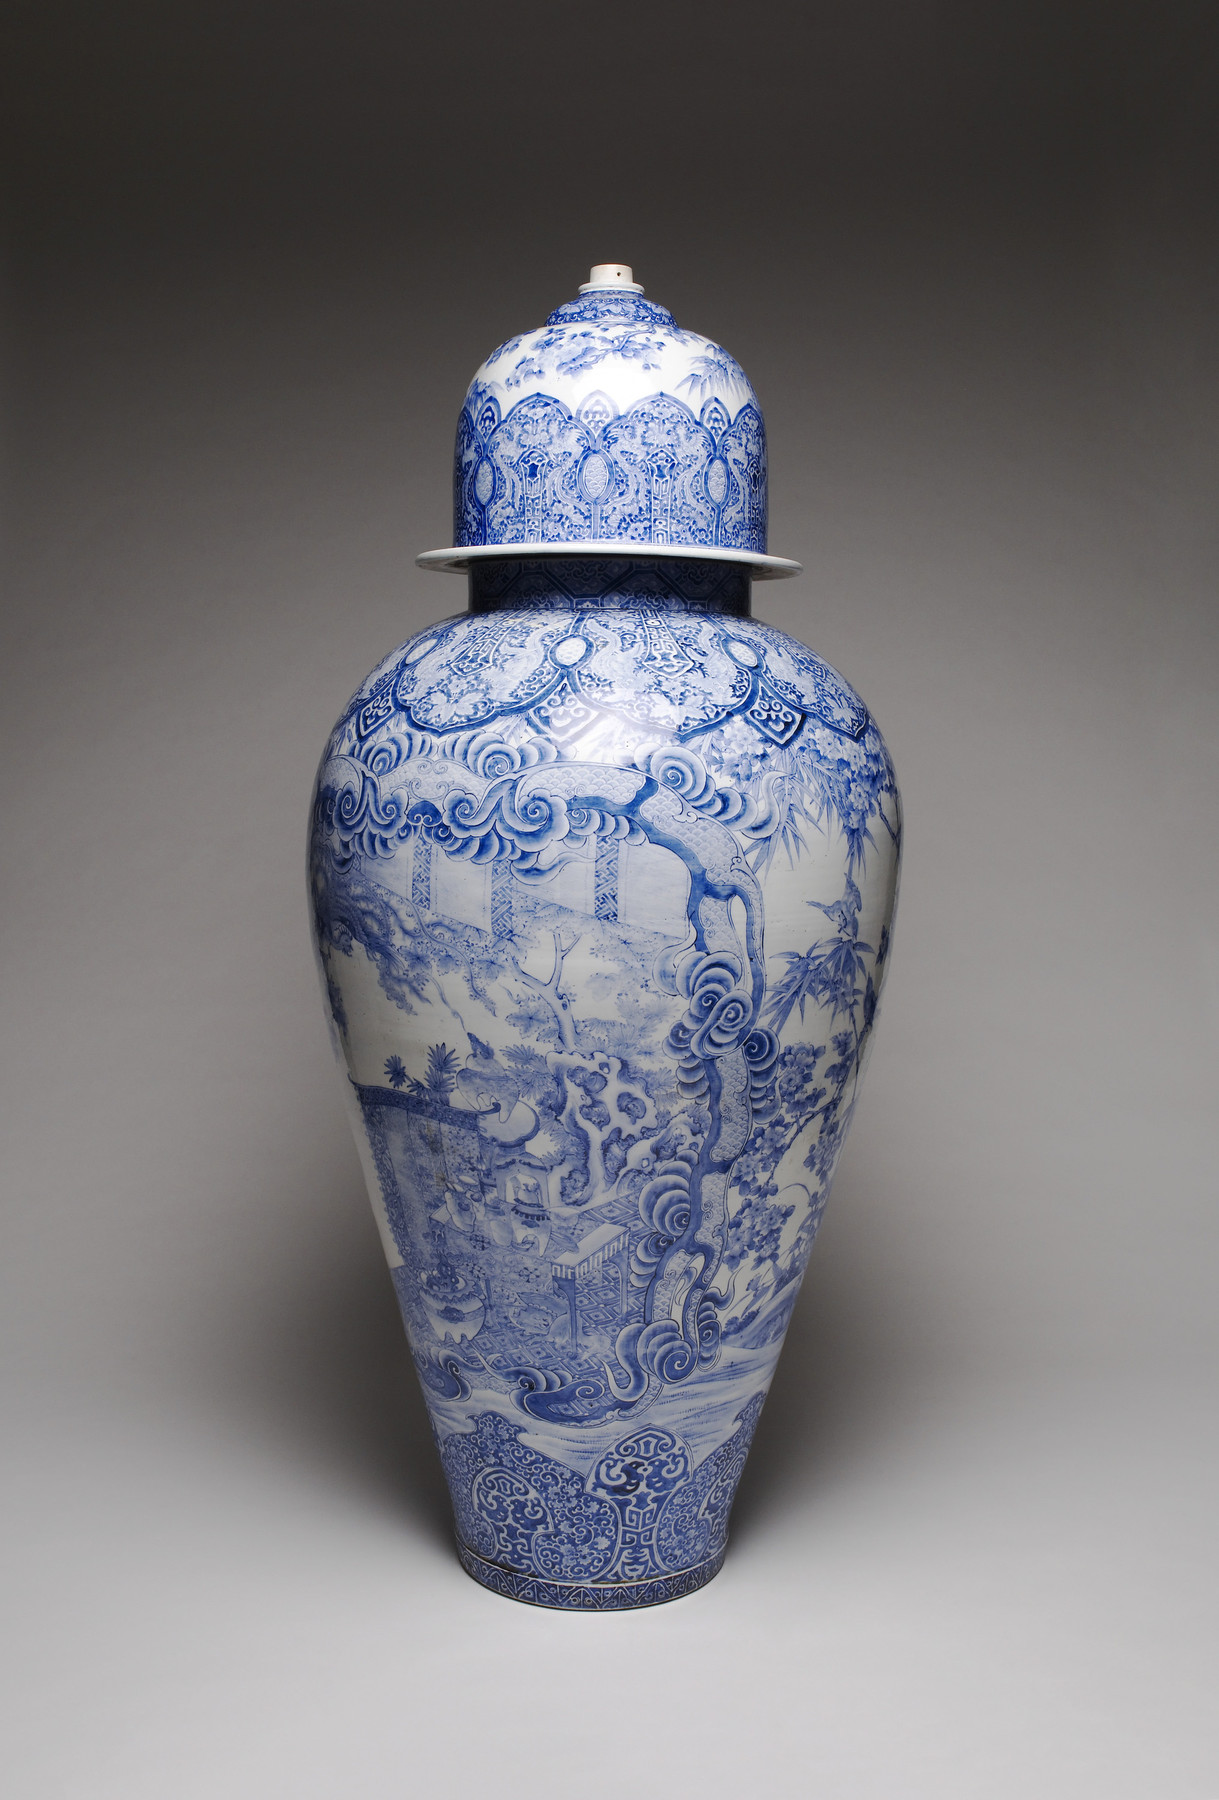 Image for Arita Ware Covered Jar with a Panel Depicting a Collection of Antiques in a Chinese Garden